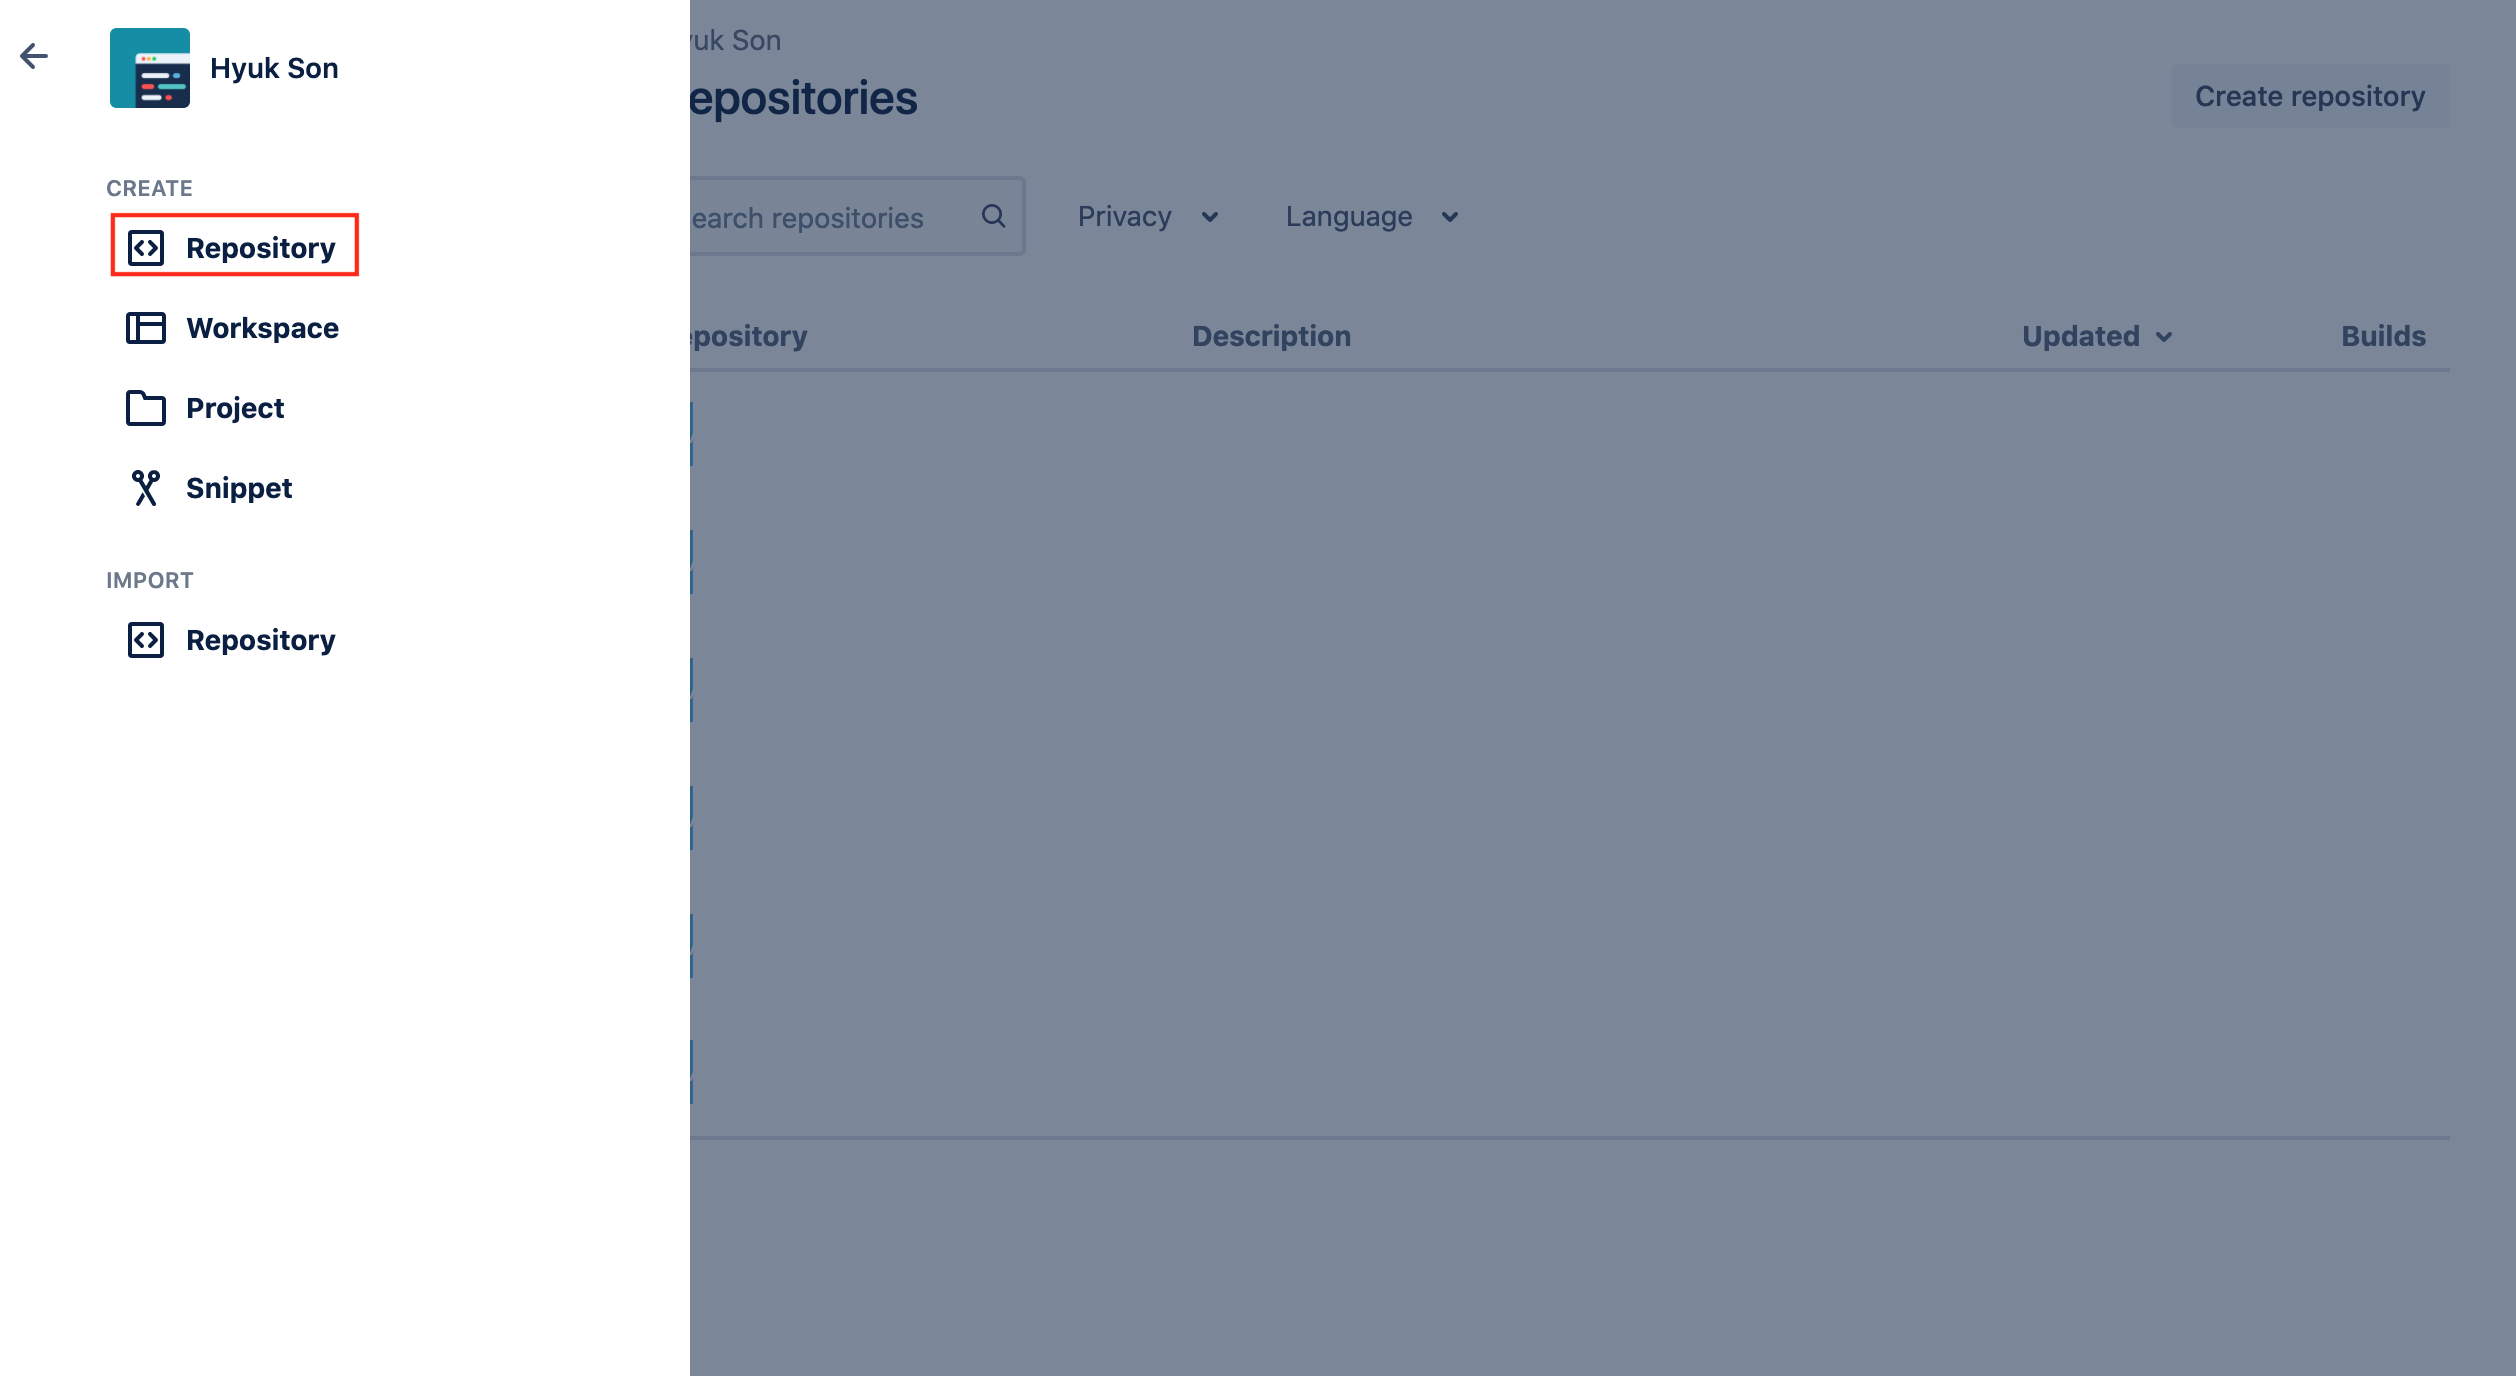 Creating a Repository on Bitbucket (Step 2)